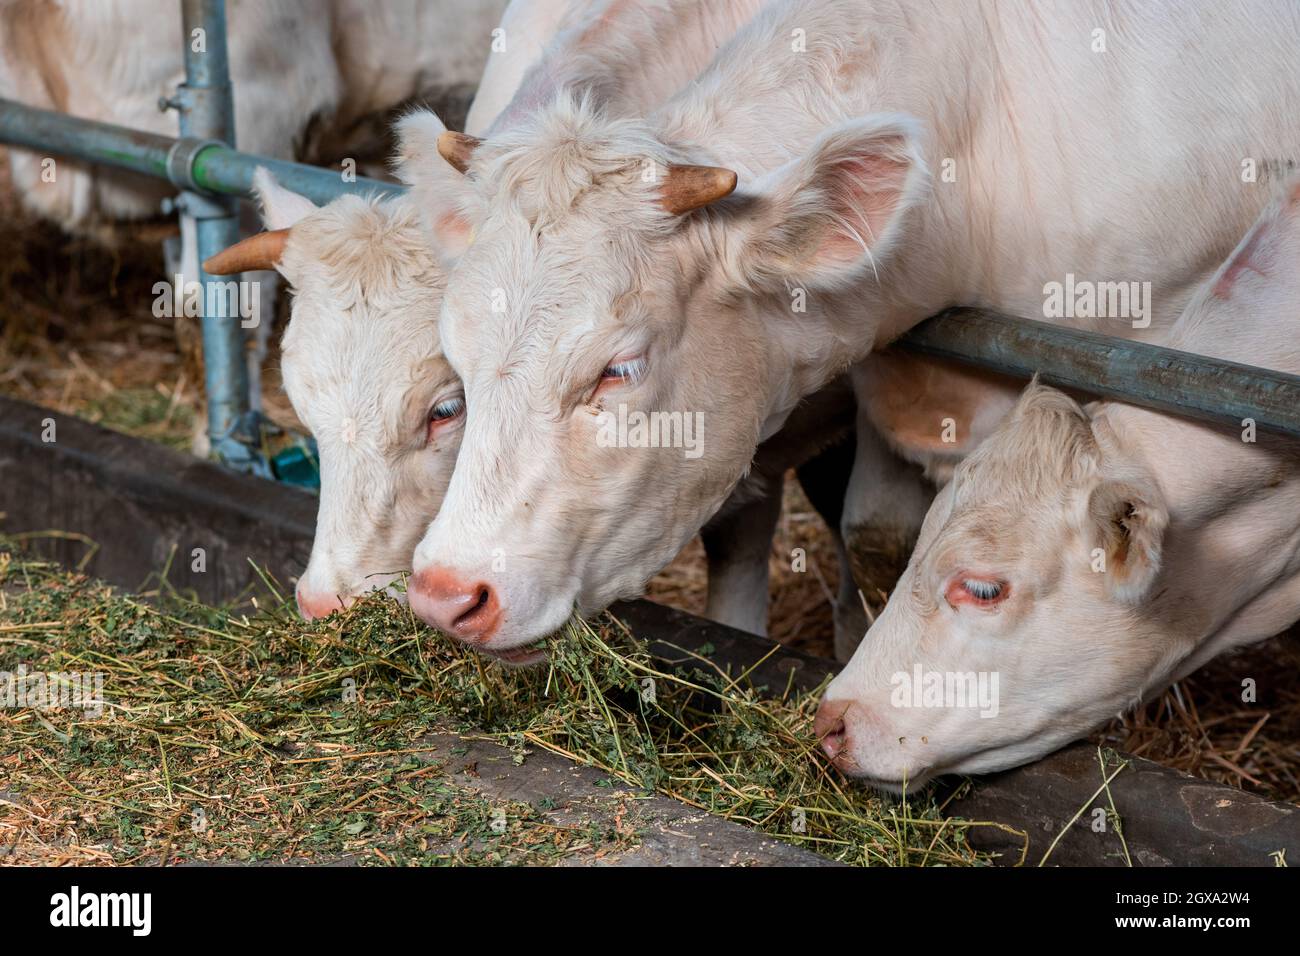 Blonde d'Aquitaine cattle cows on dairy farm, domestic animal husbandry Stock Photo